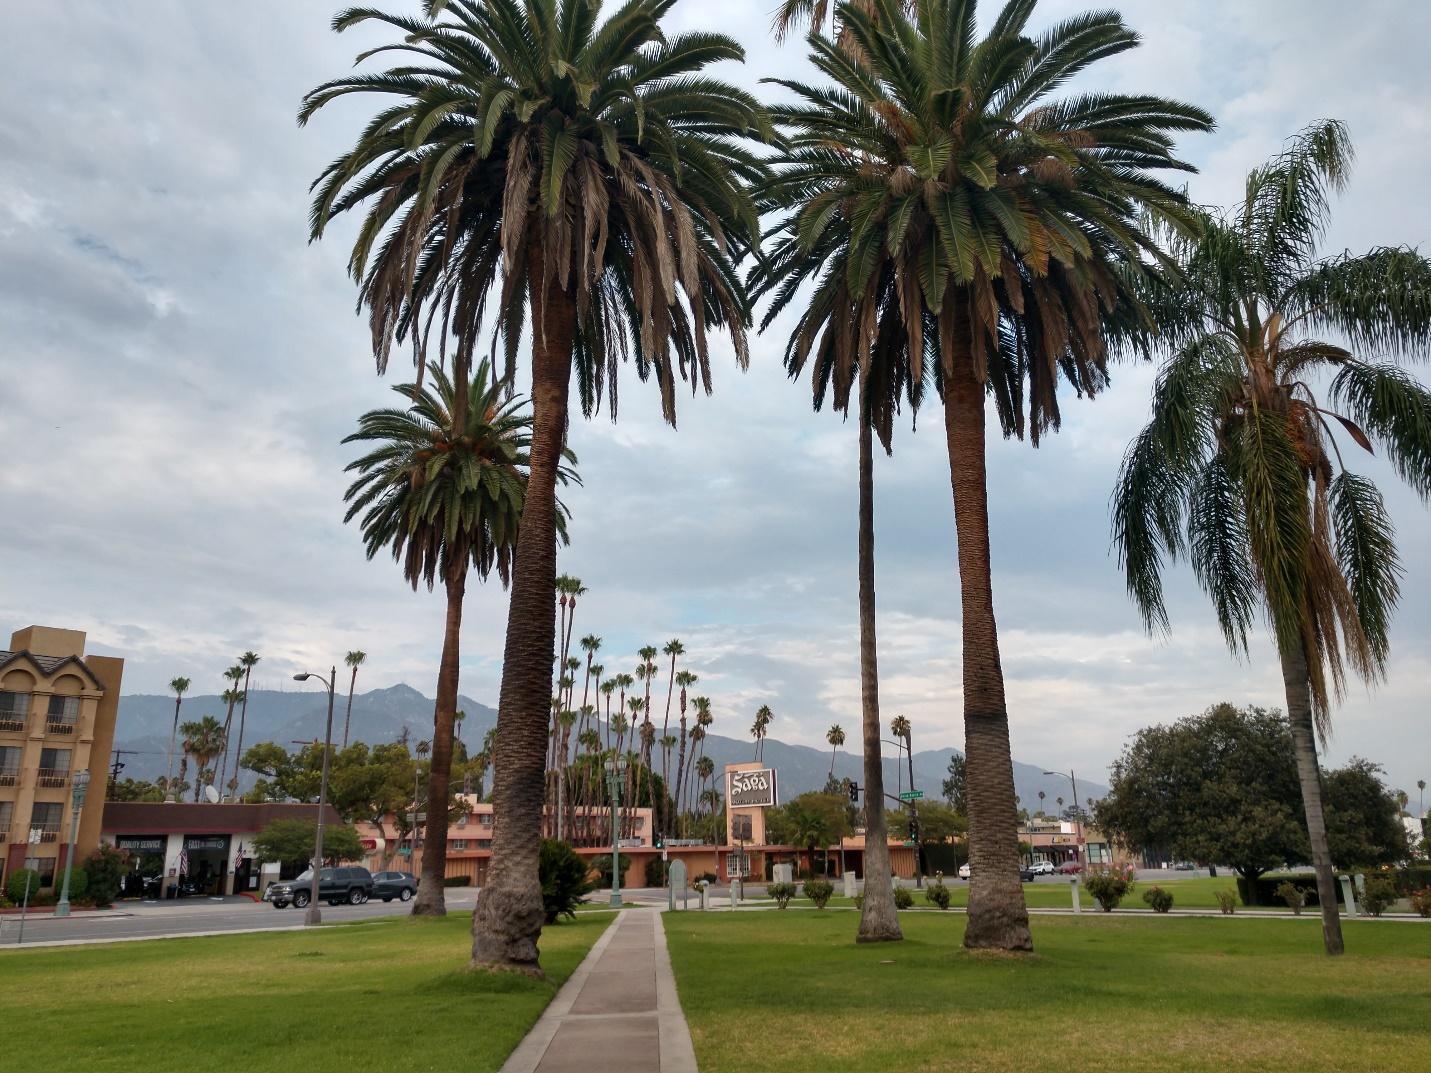 A group of palm trees

Description automatically generated with low confidence